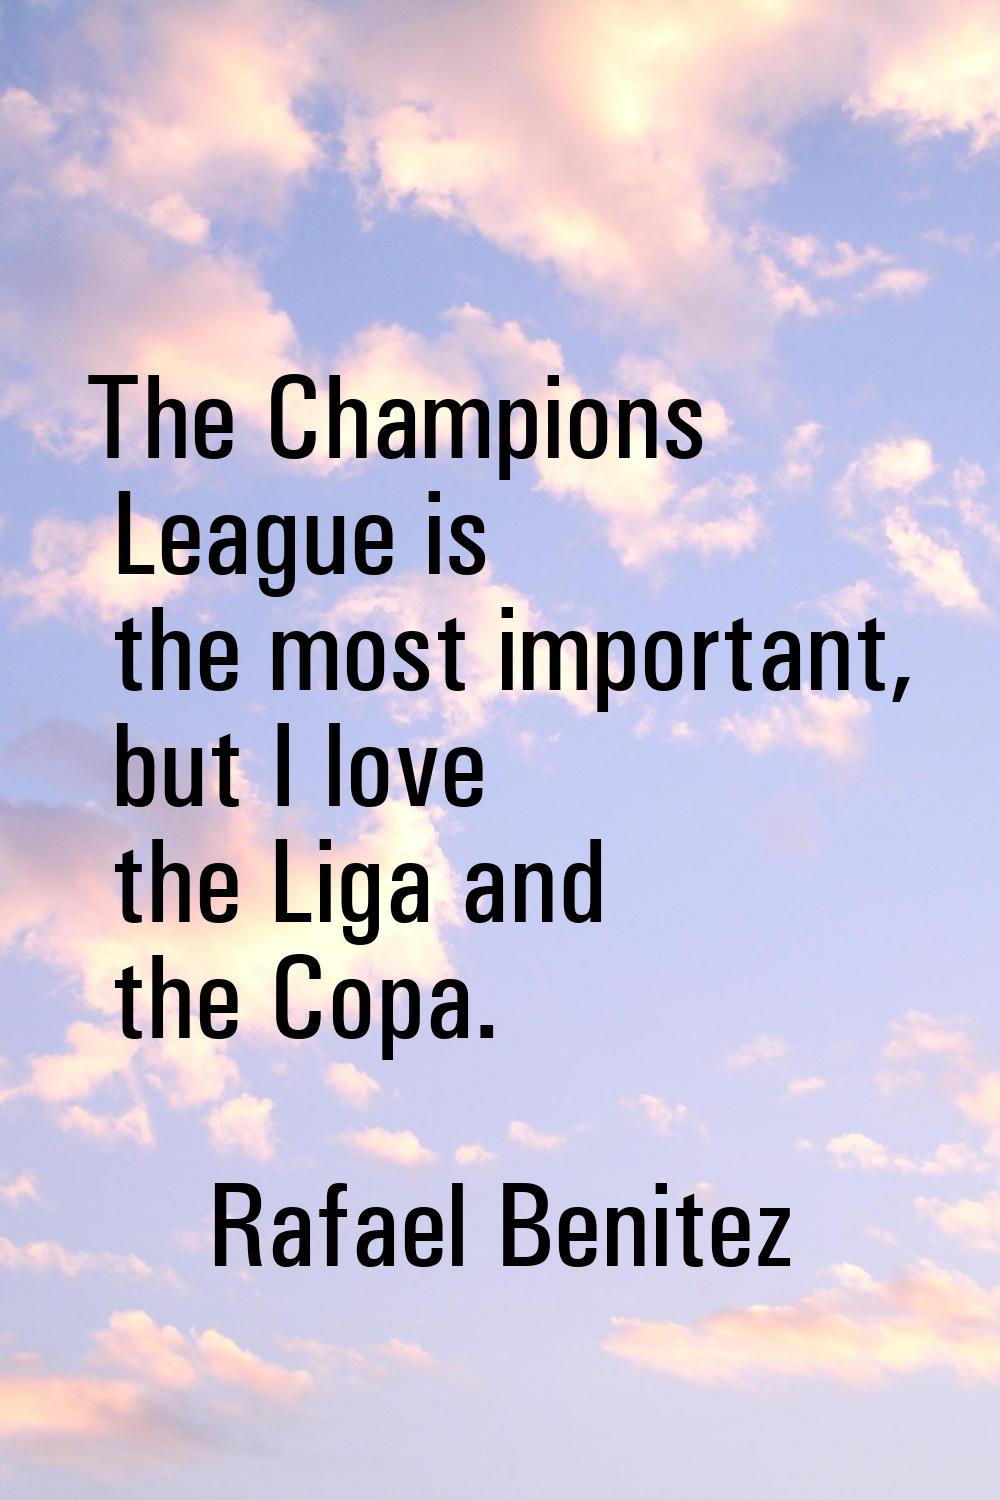 The Champions League is the most important, but I love the Liga and the Copa.